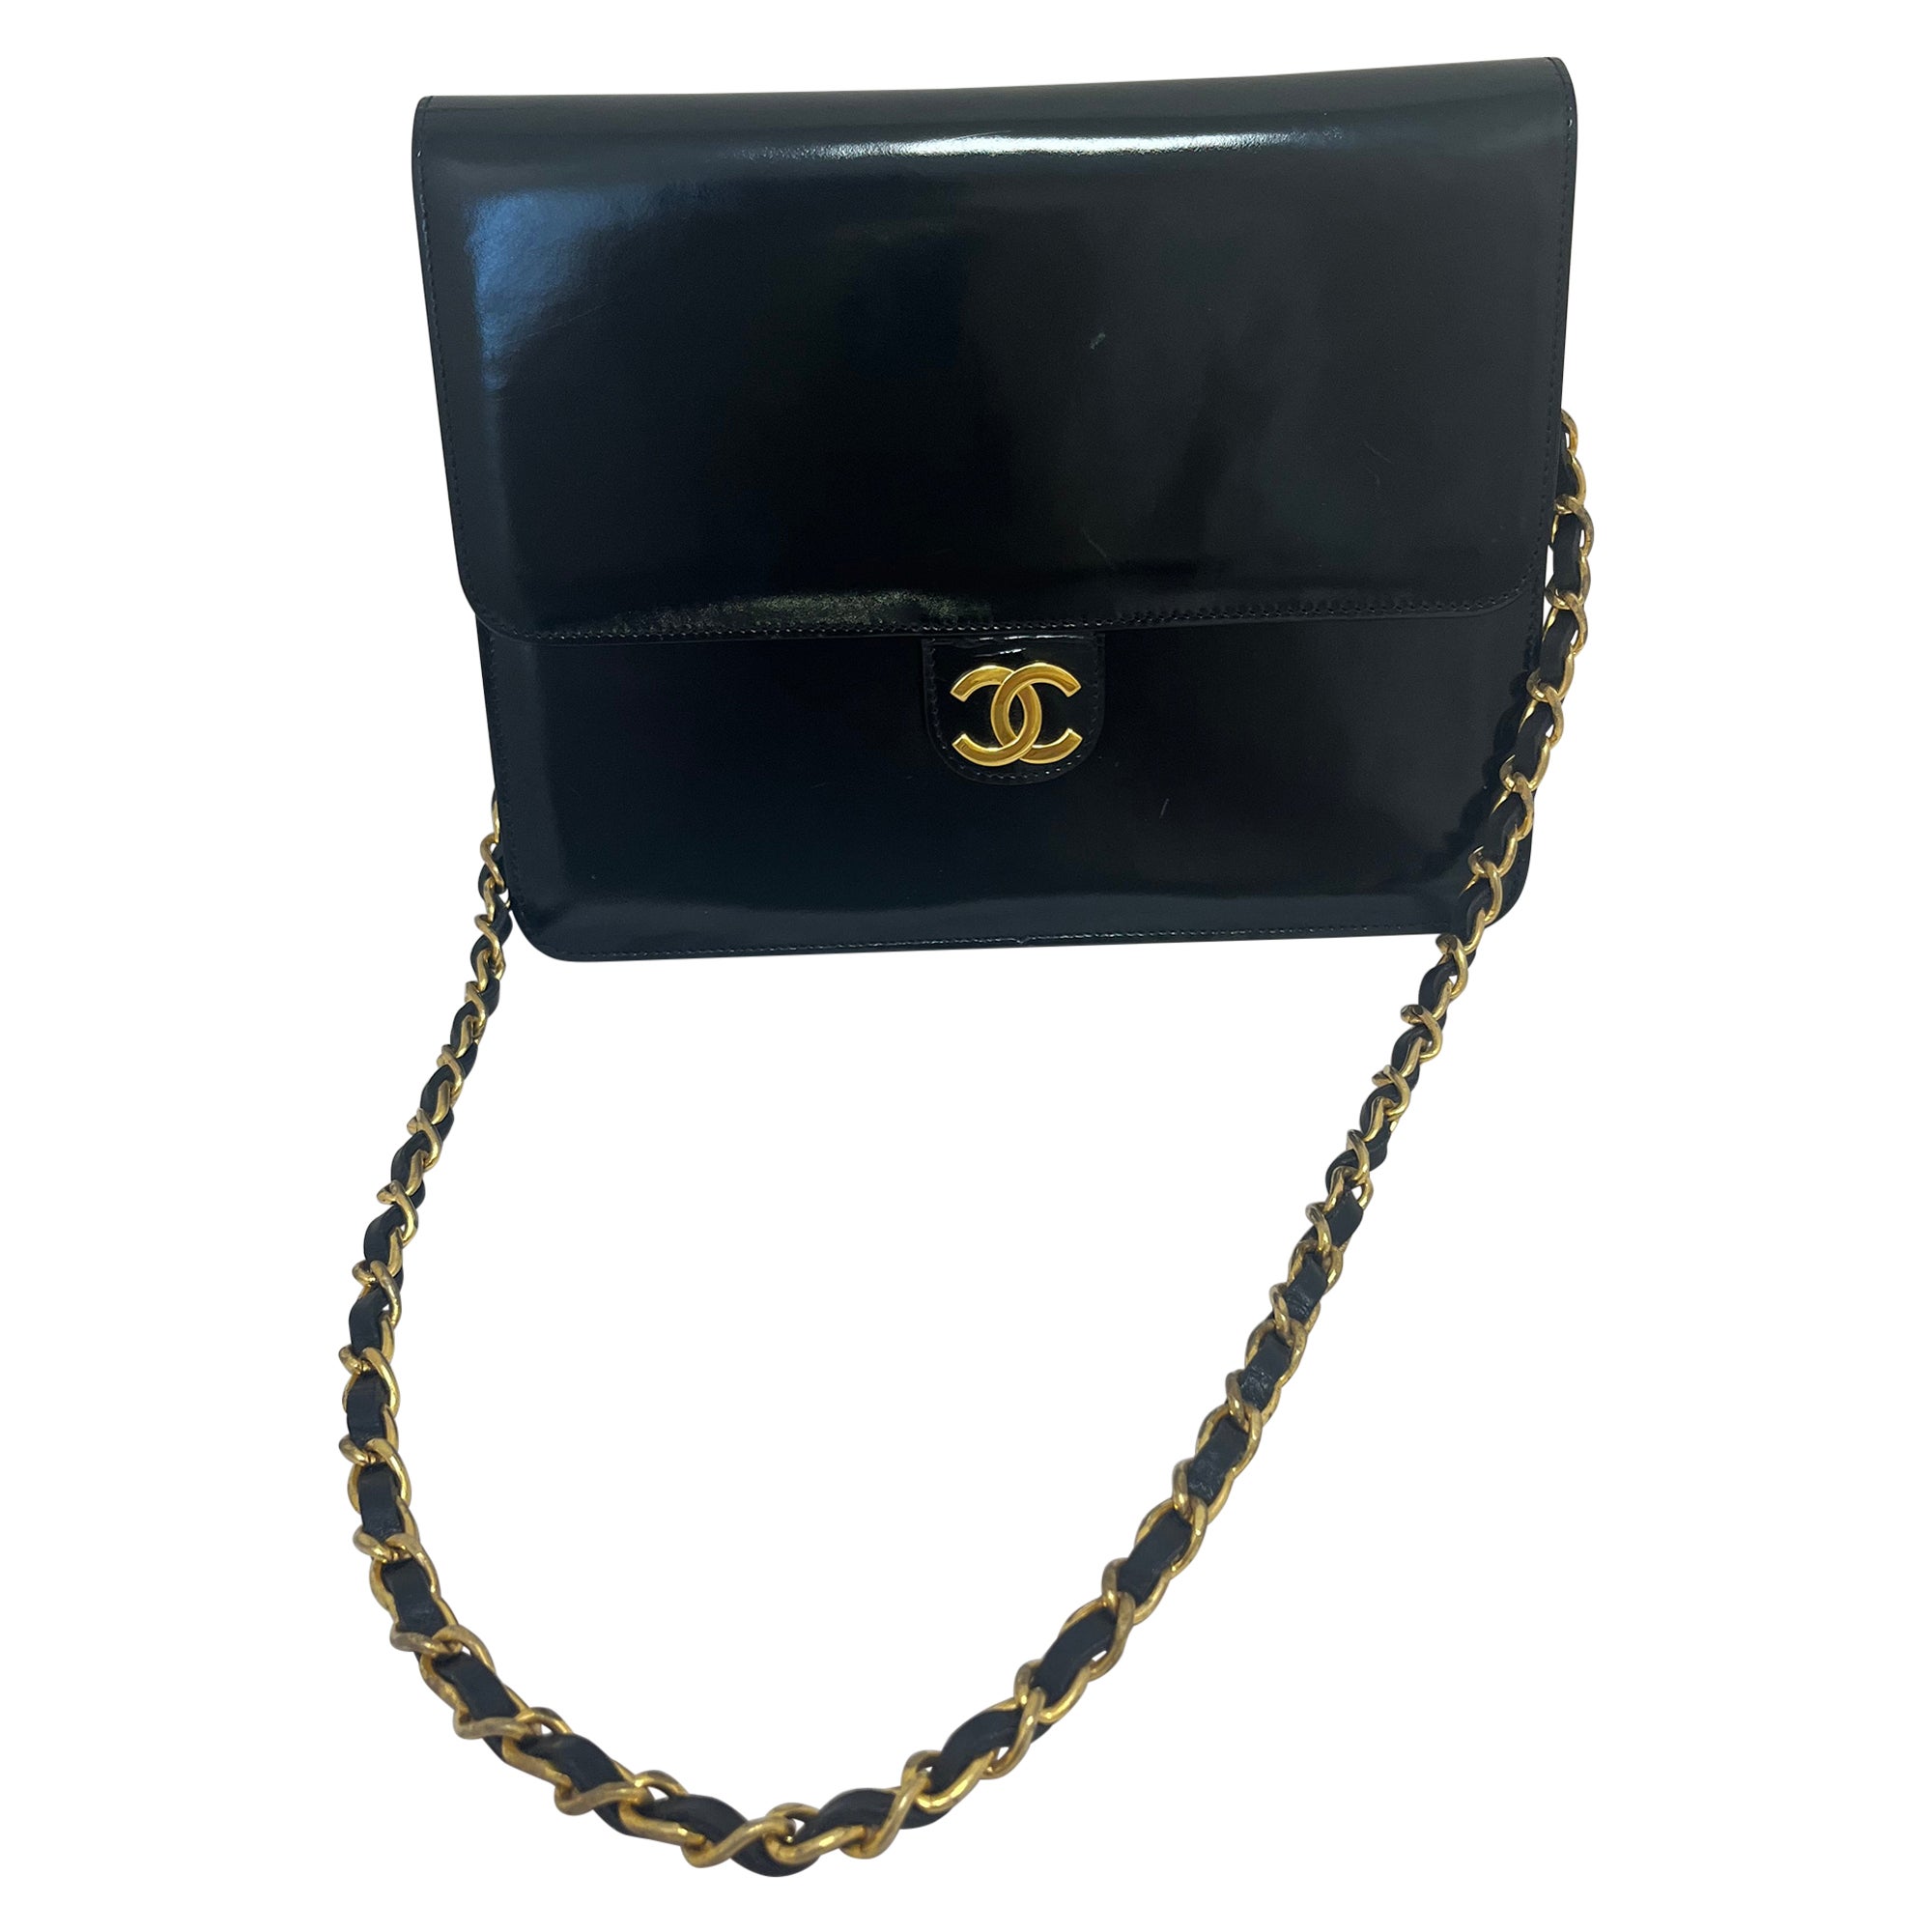 What is considered vintage for Chanel bags?